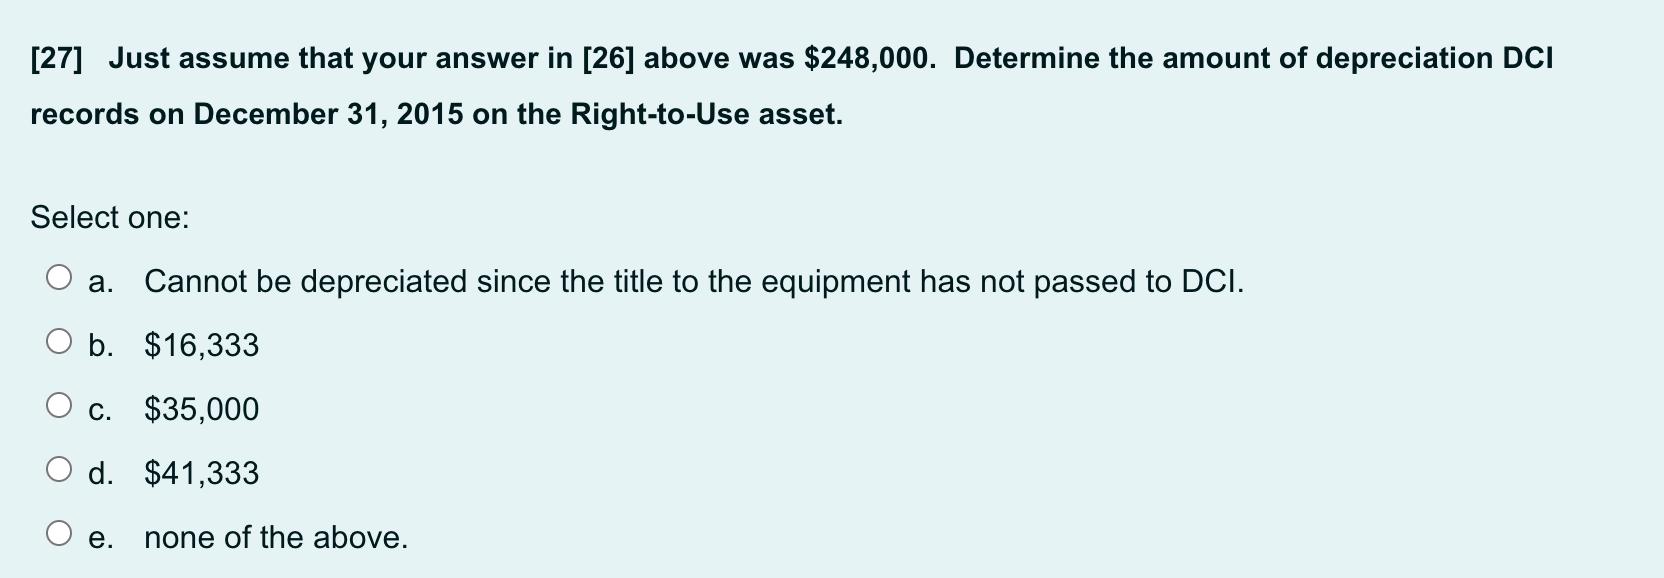 [27] Just assume that your answer in [26] above was $248,000. Determine the amount of depreciation DCI records on December 31